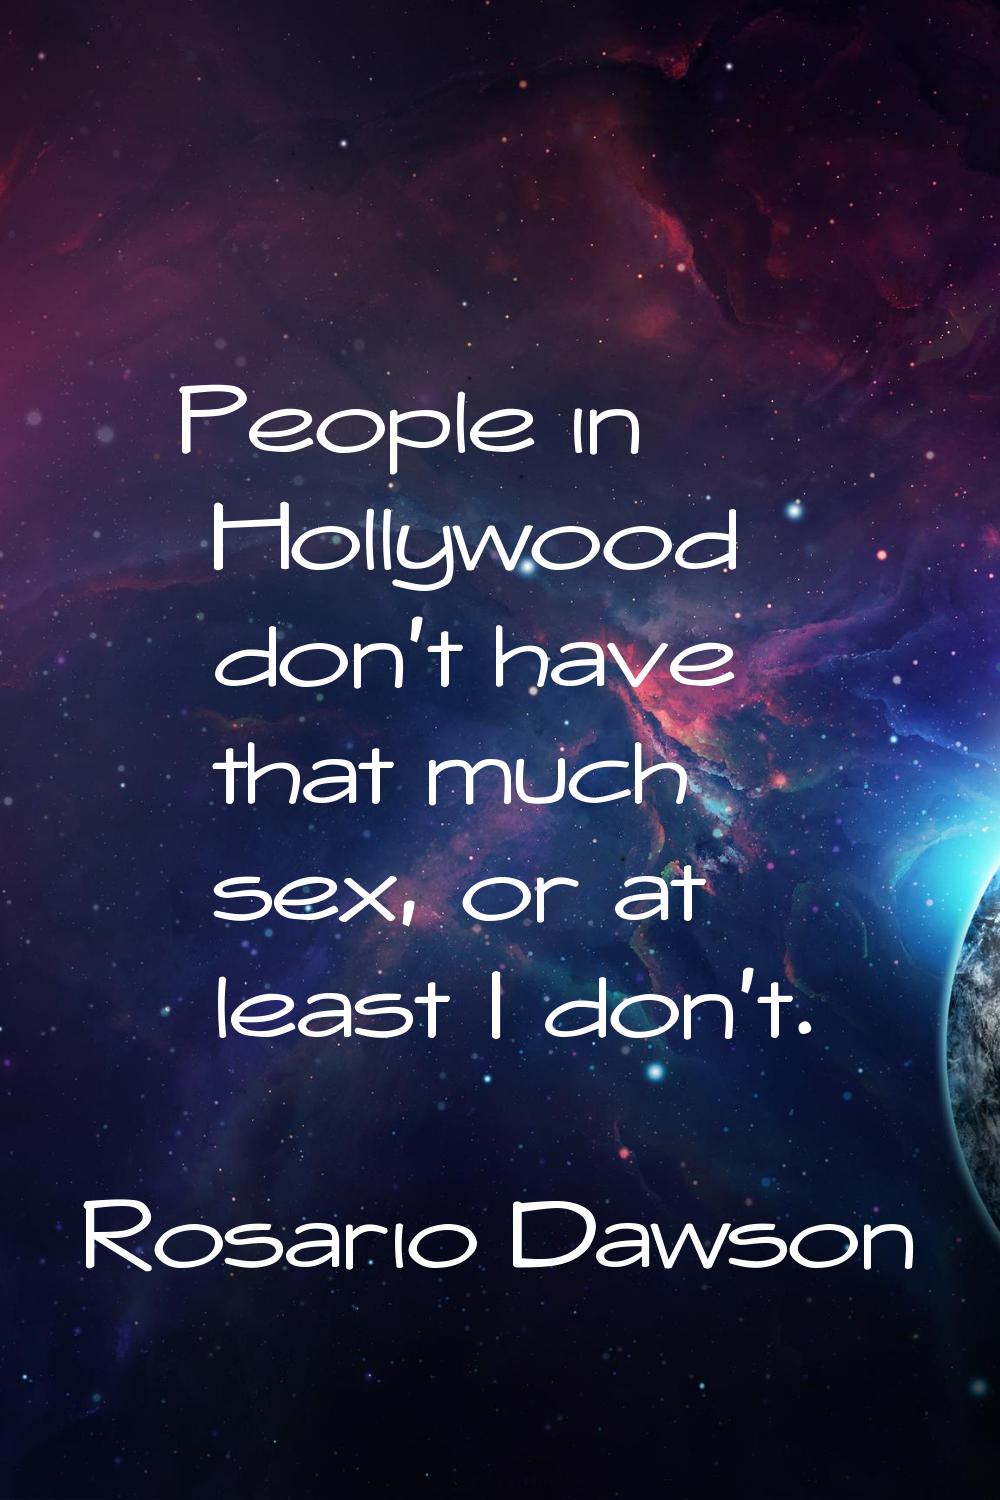 People in Hollywood don't have that much sex, or at least I don't.